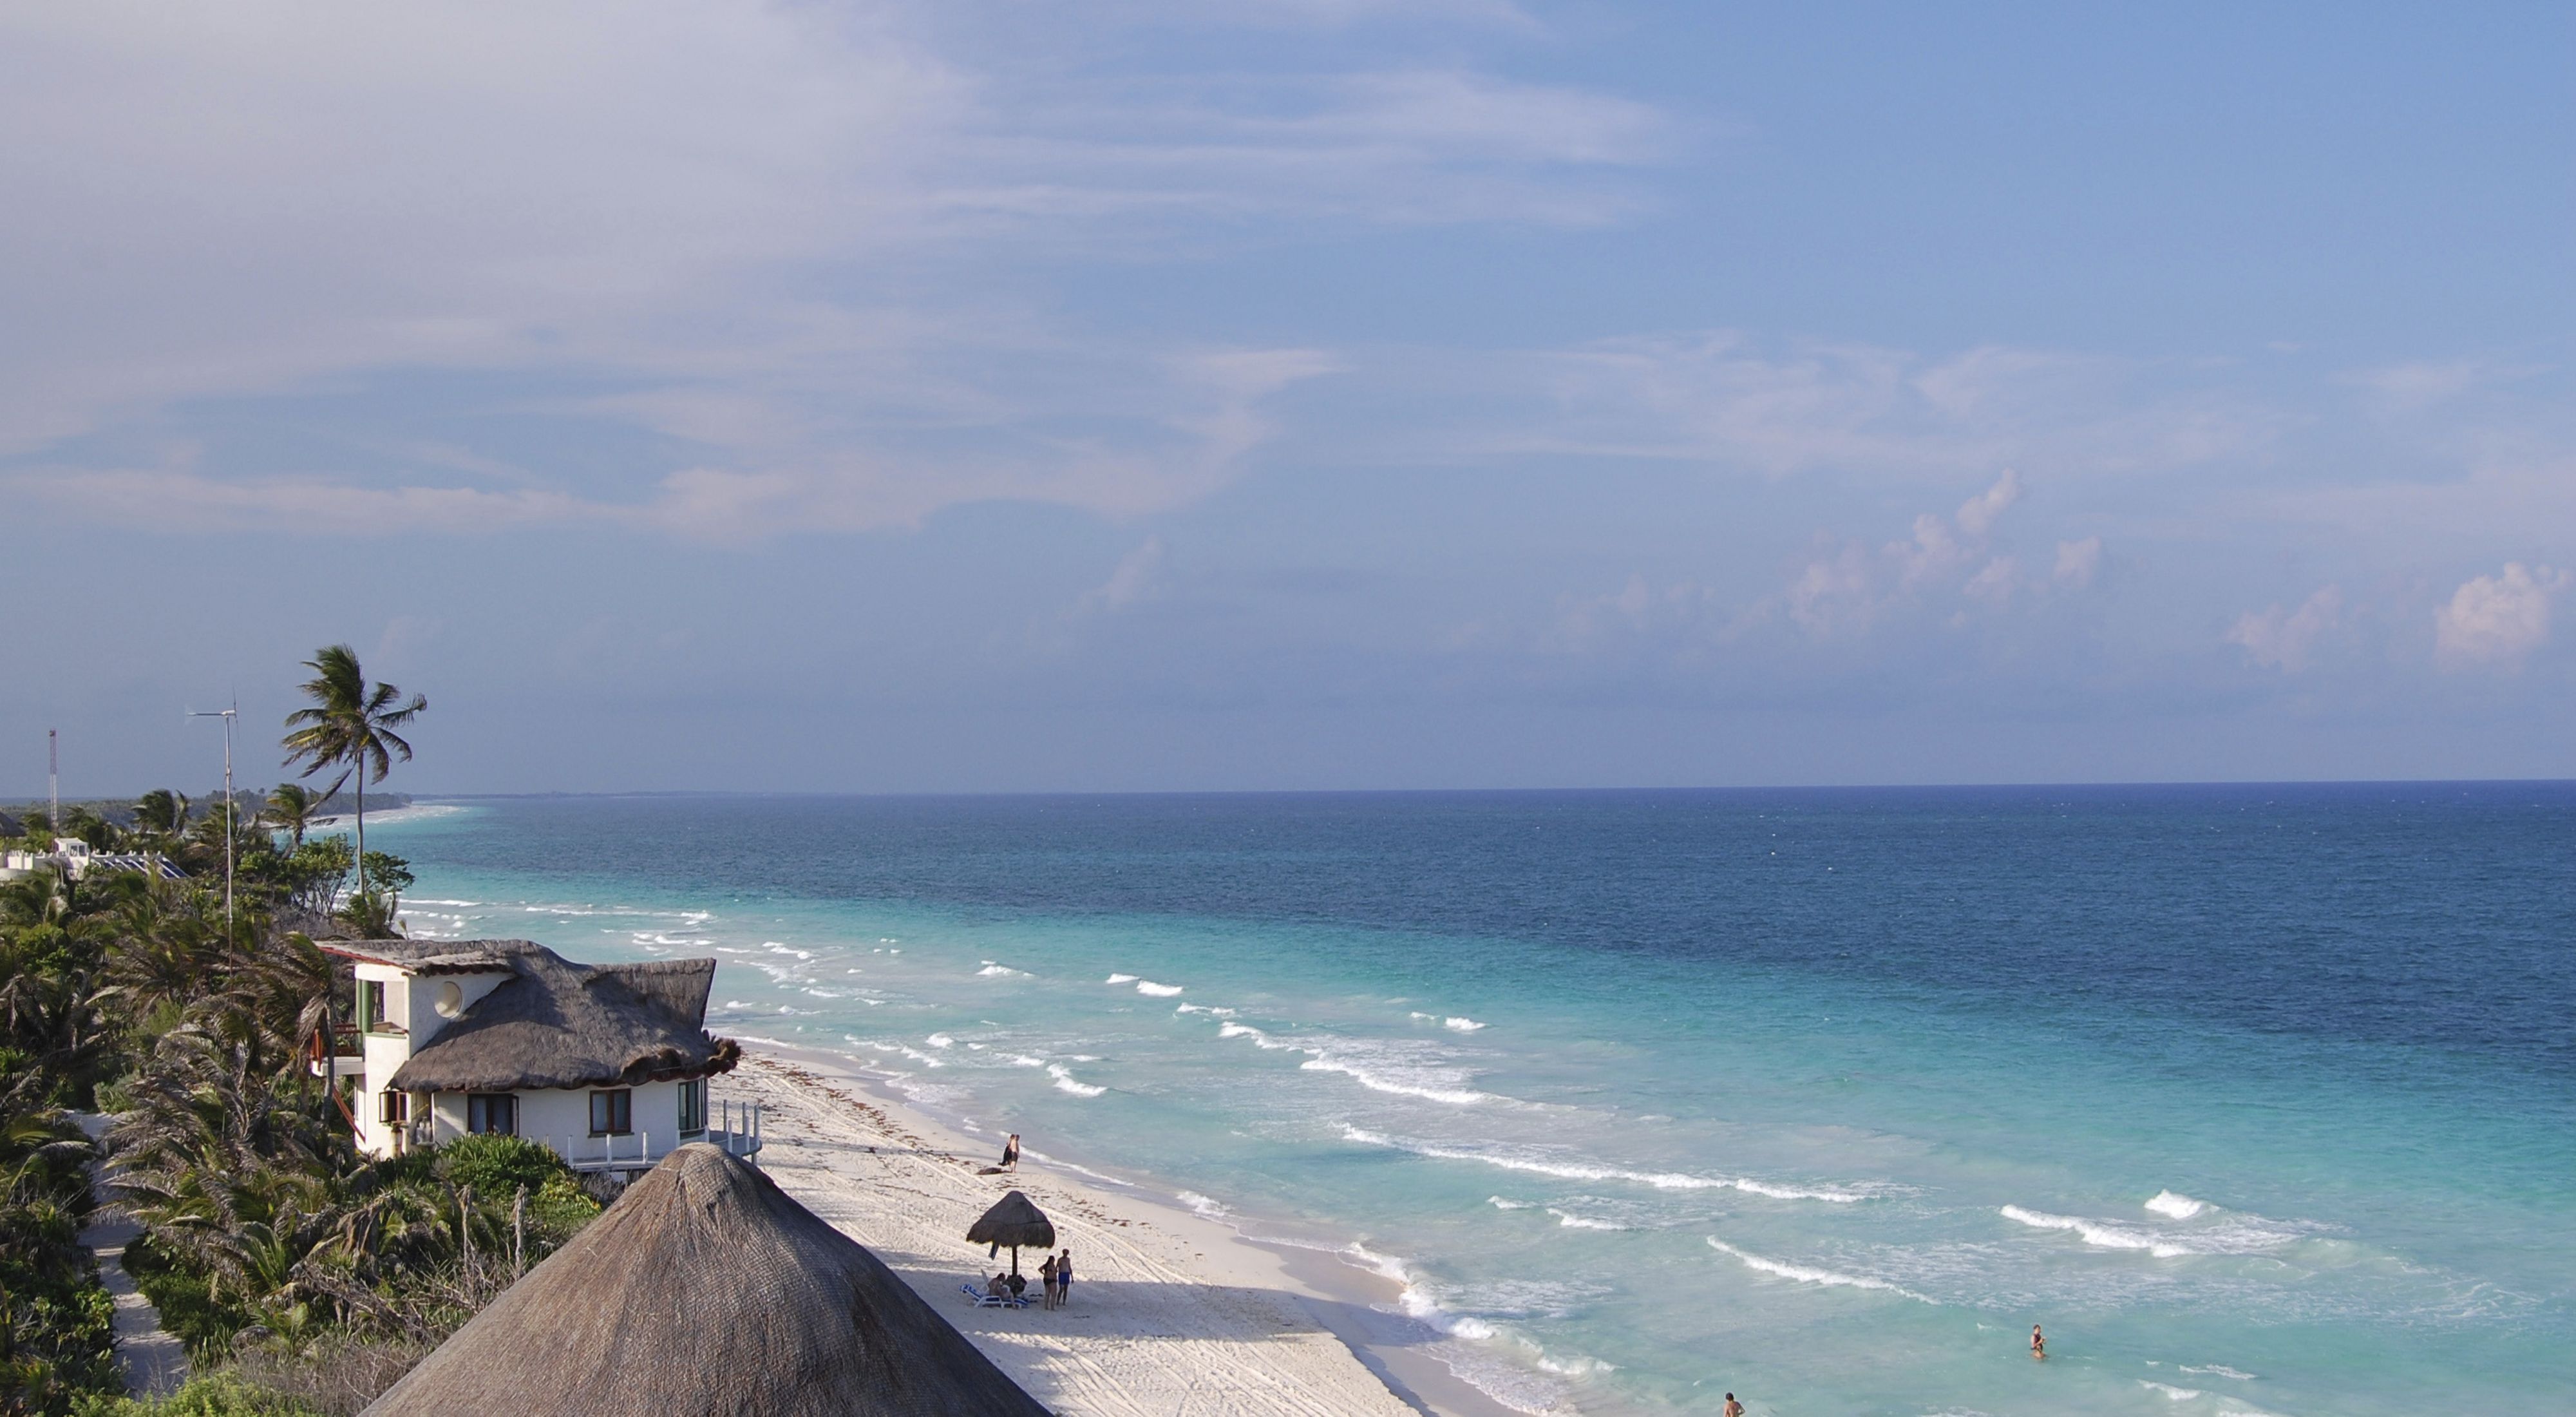 Along the Caribbean coast of Tulum just north of the Sian Ka’an Biosphere Reserve in Quintana Roo, Mexico.